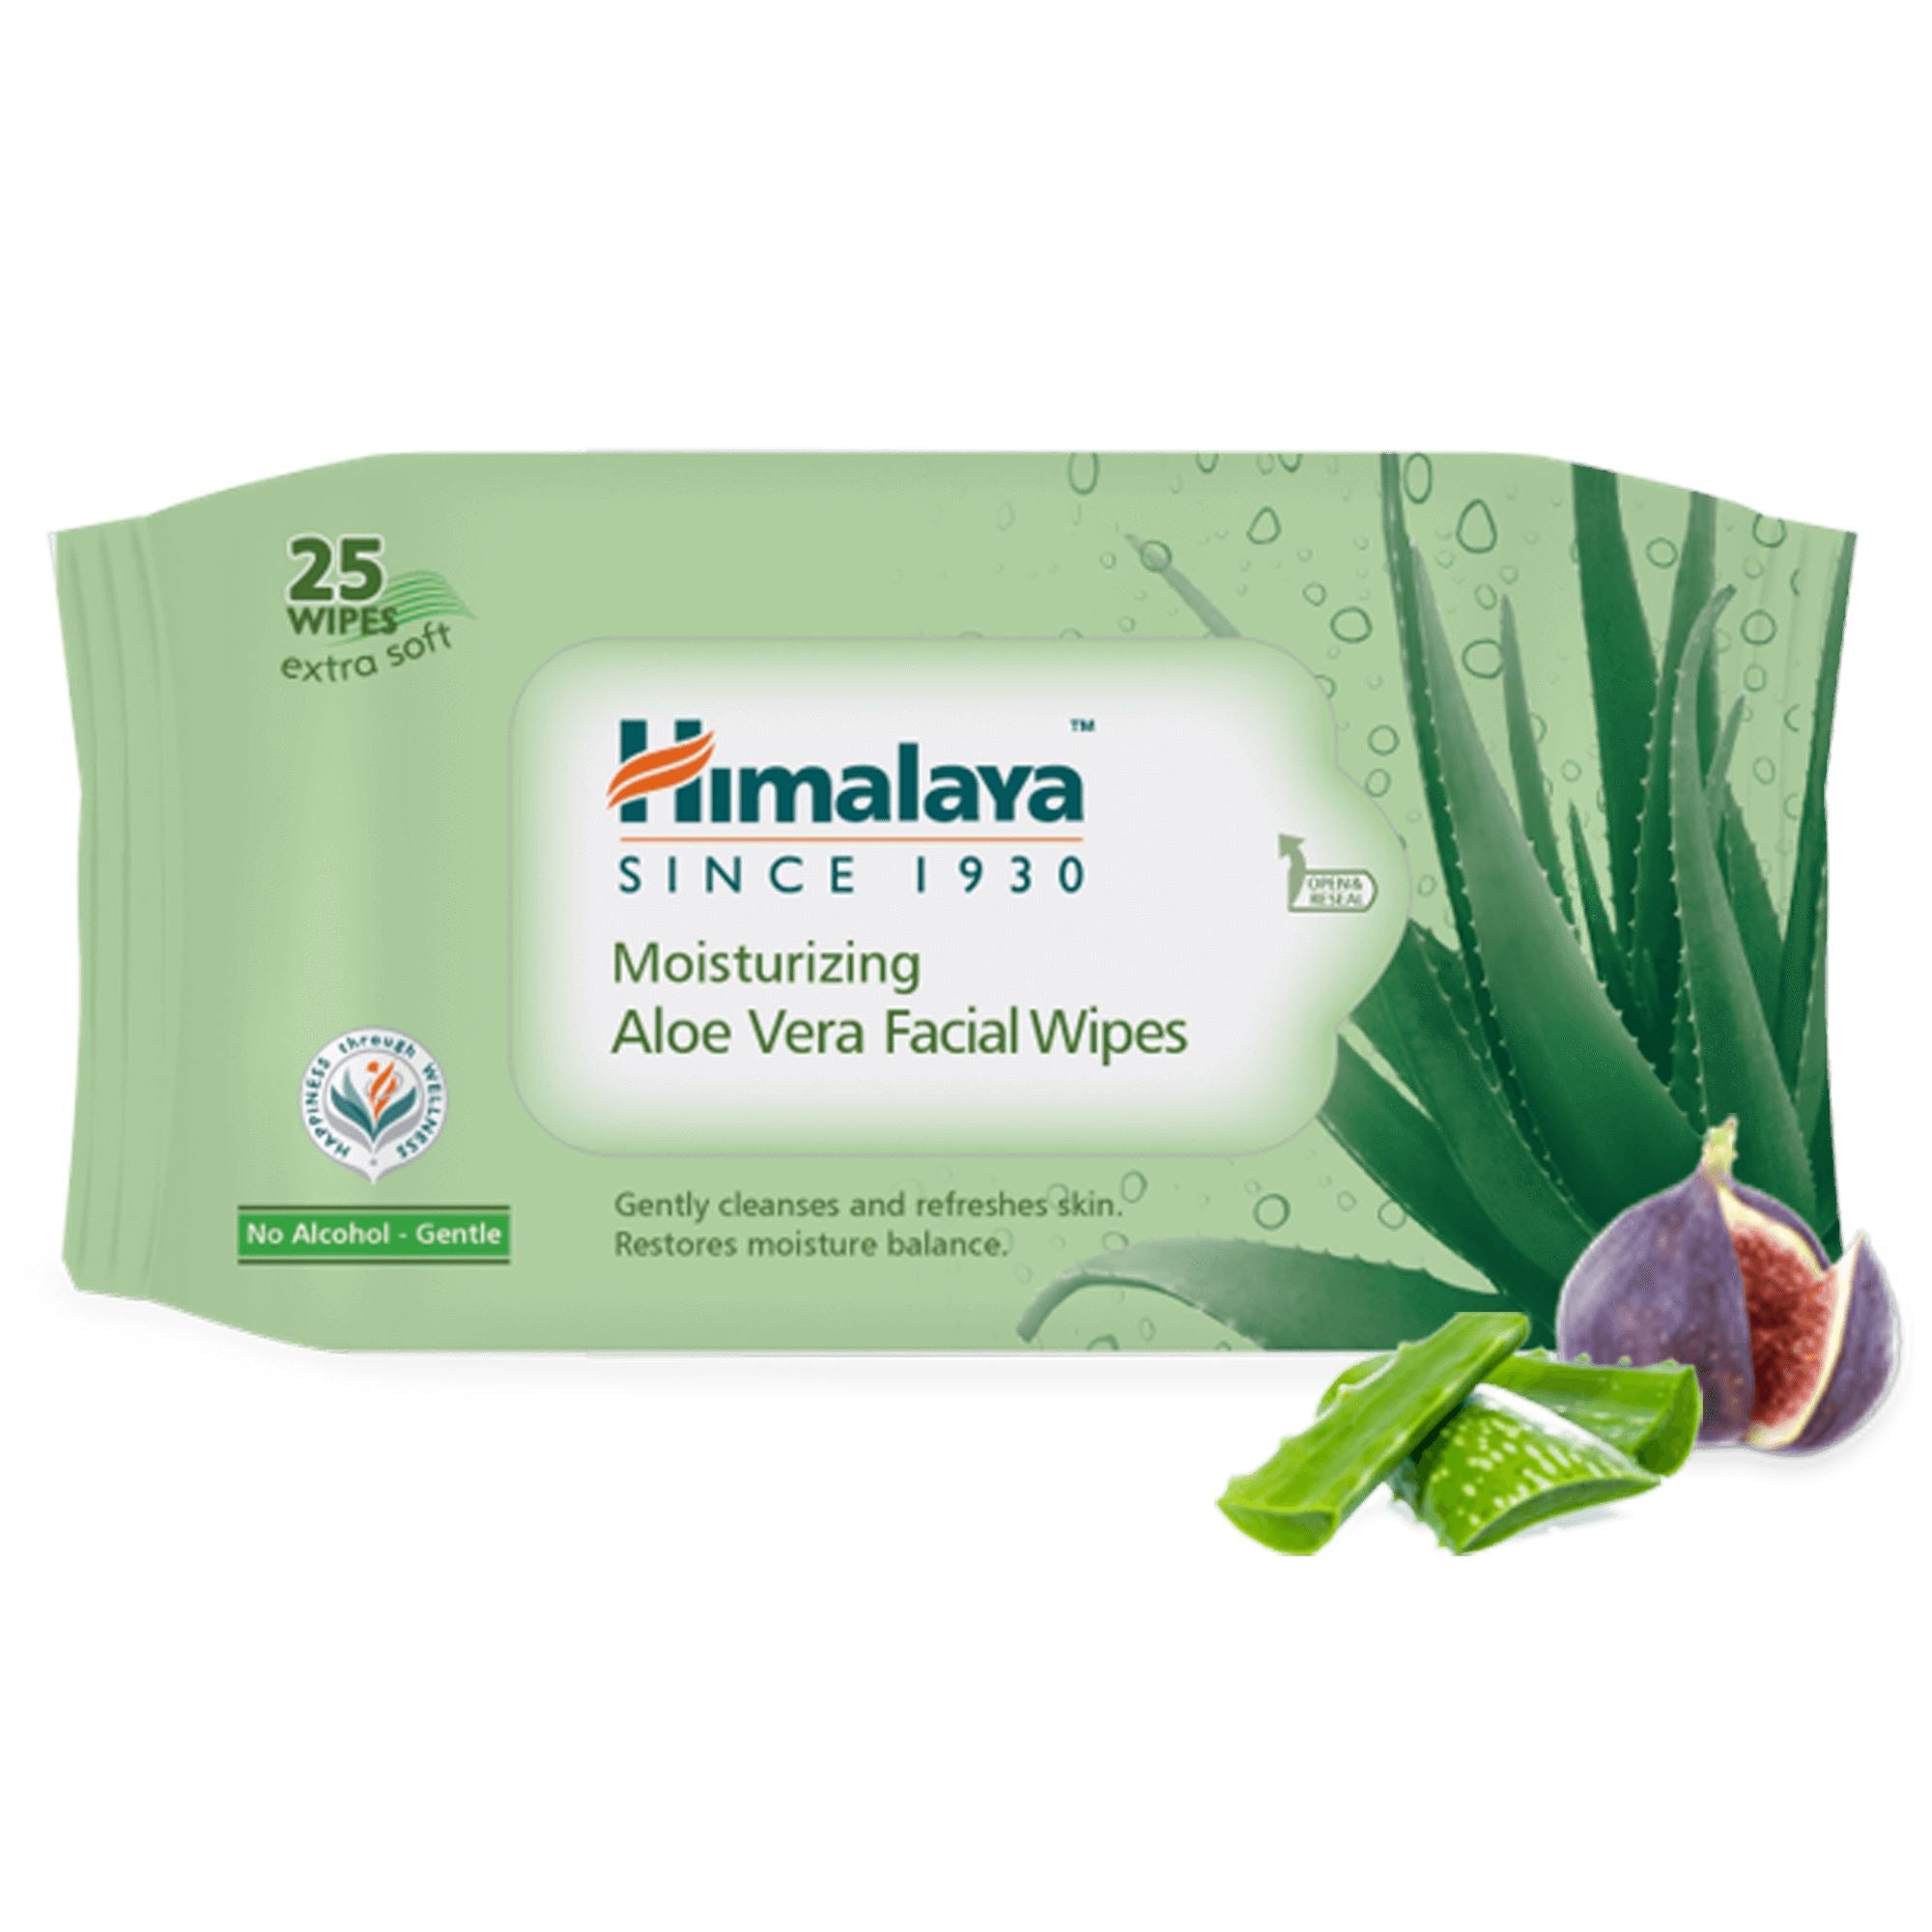 Himalaya Moisturizing Aloe Vera Facial Wipes - Gently cleanses and refreshes skin